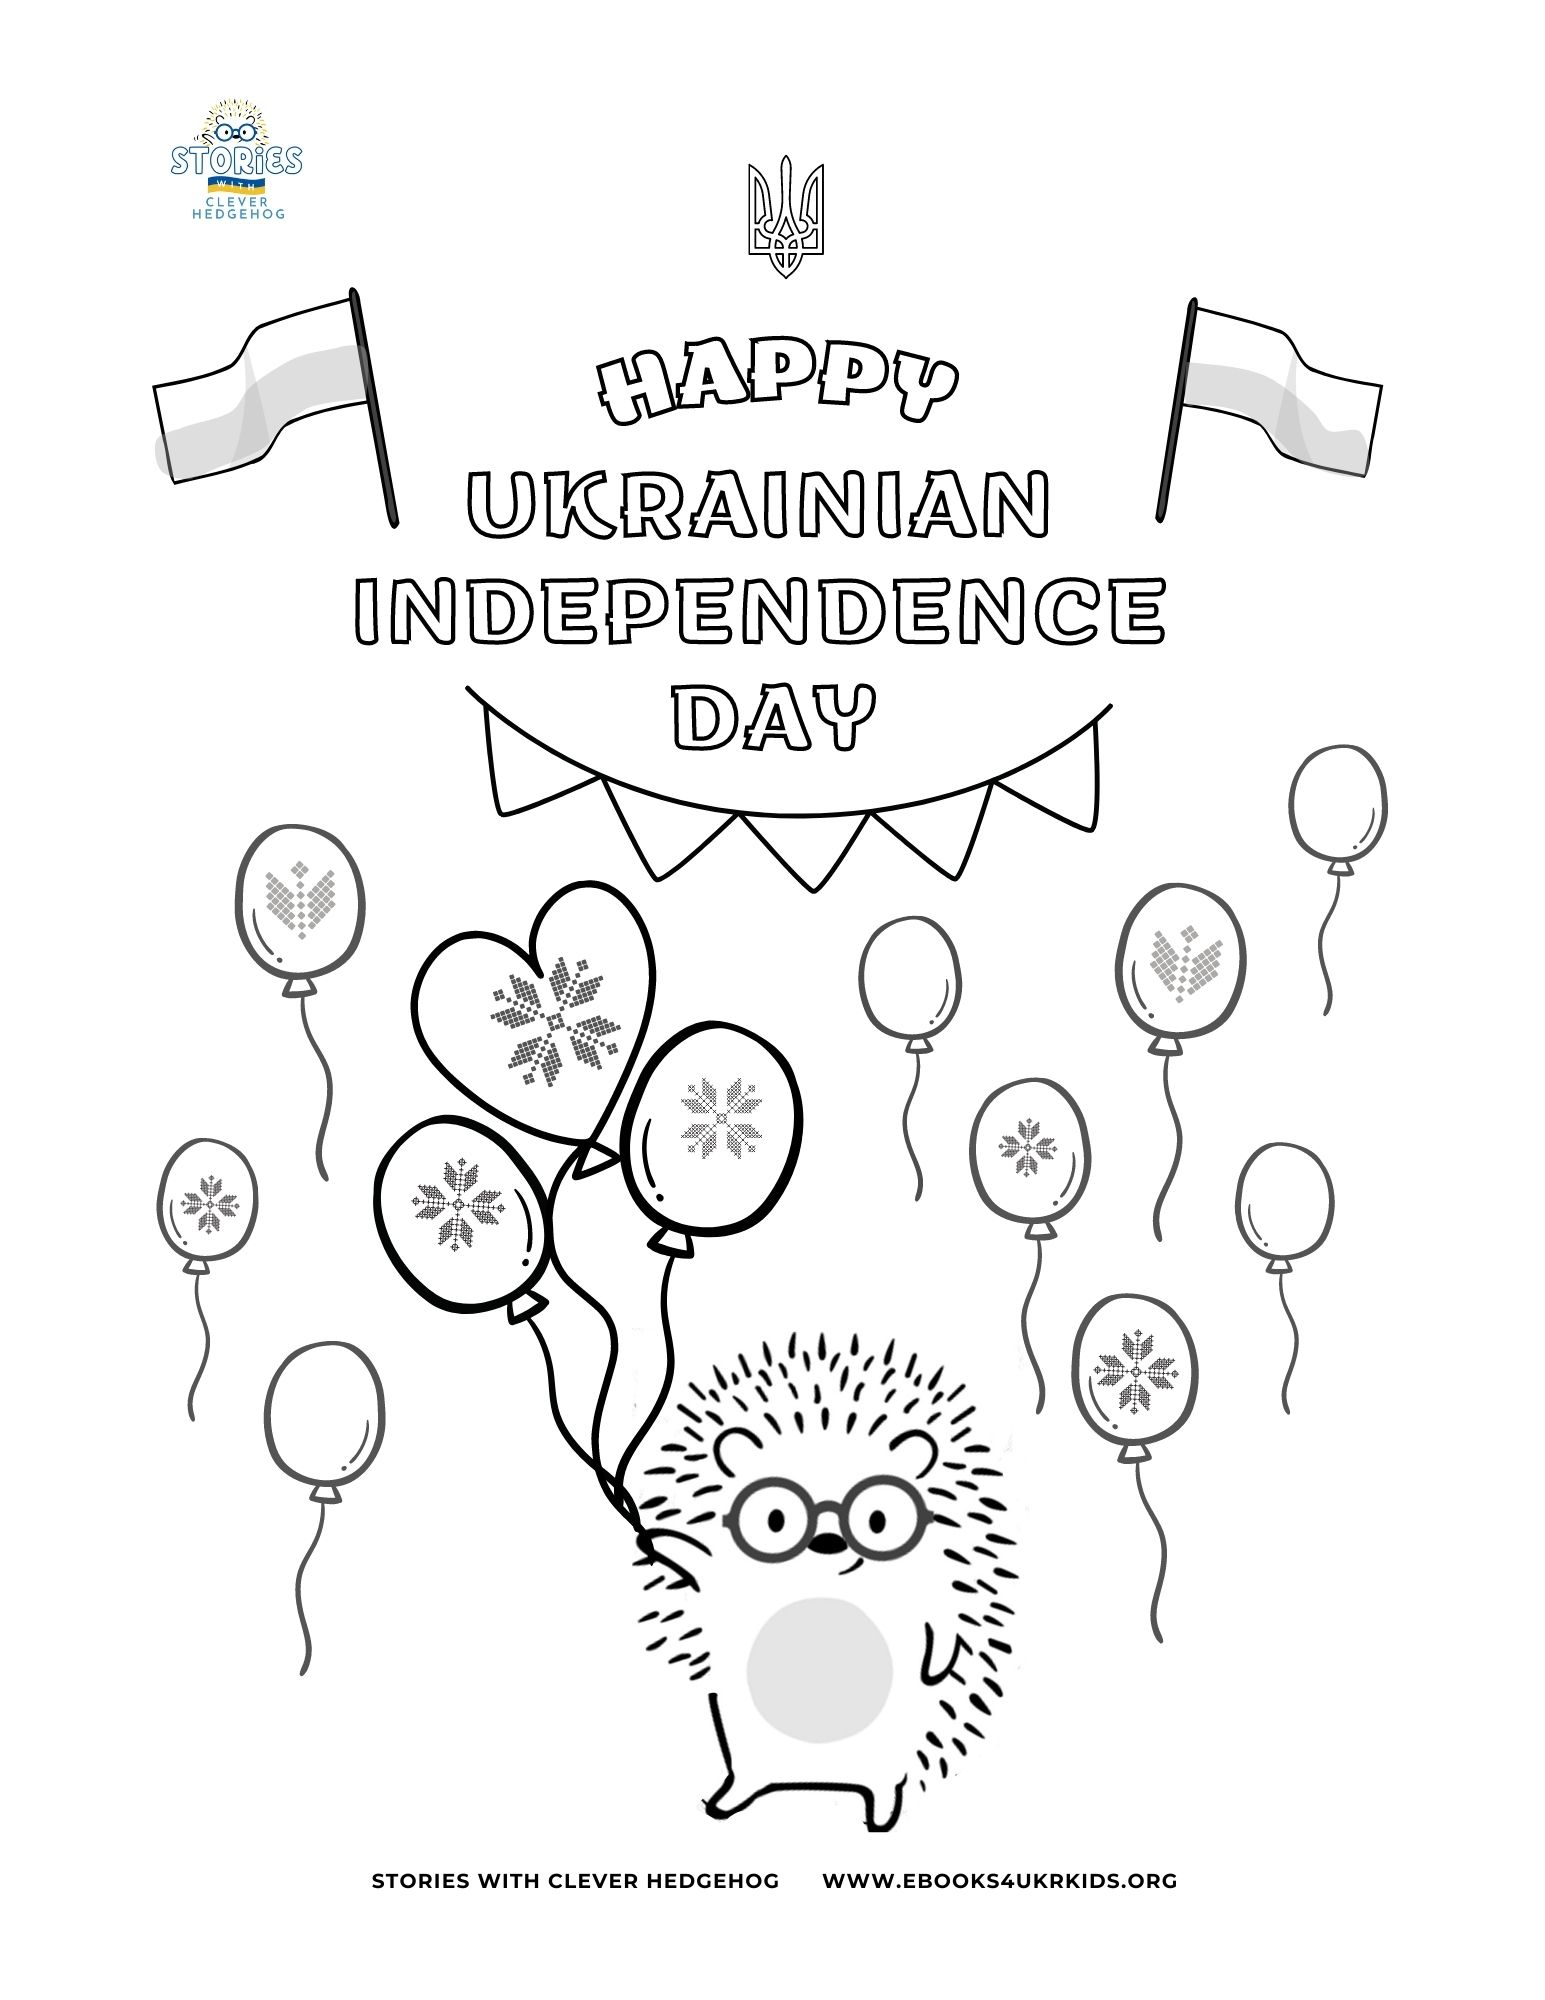 Independence Day Ukraine coloring page for kids